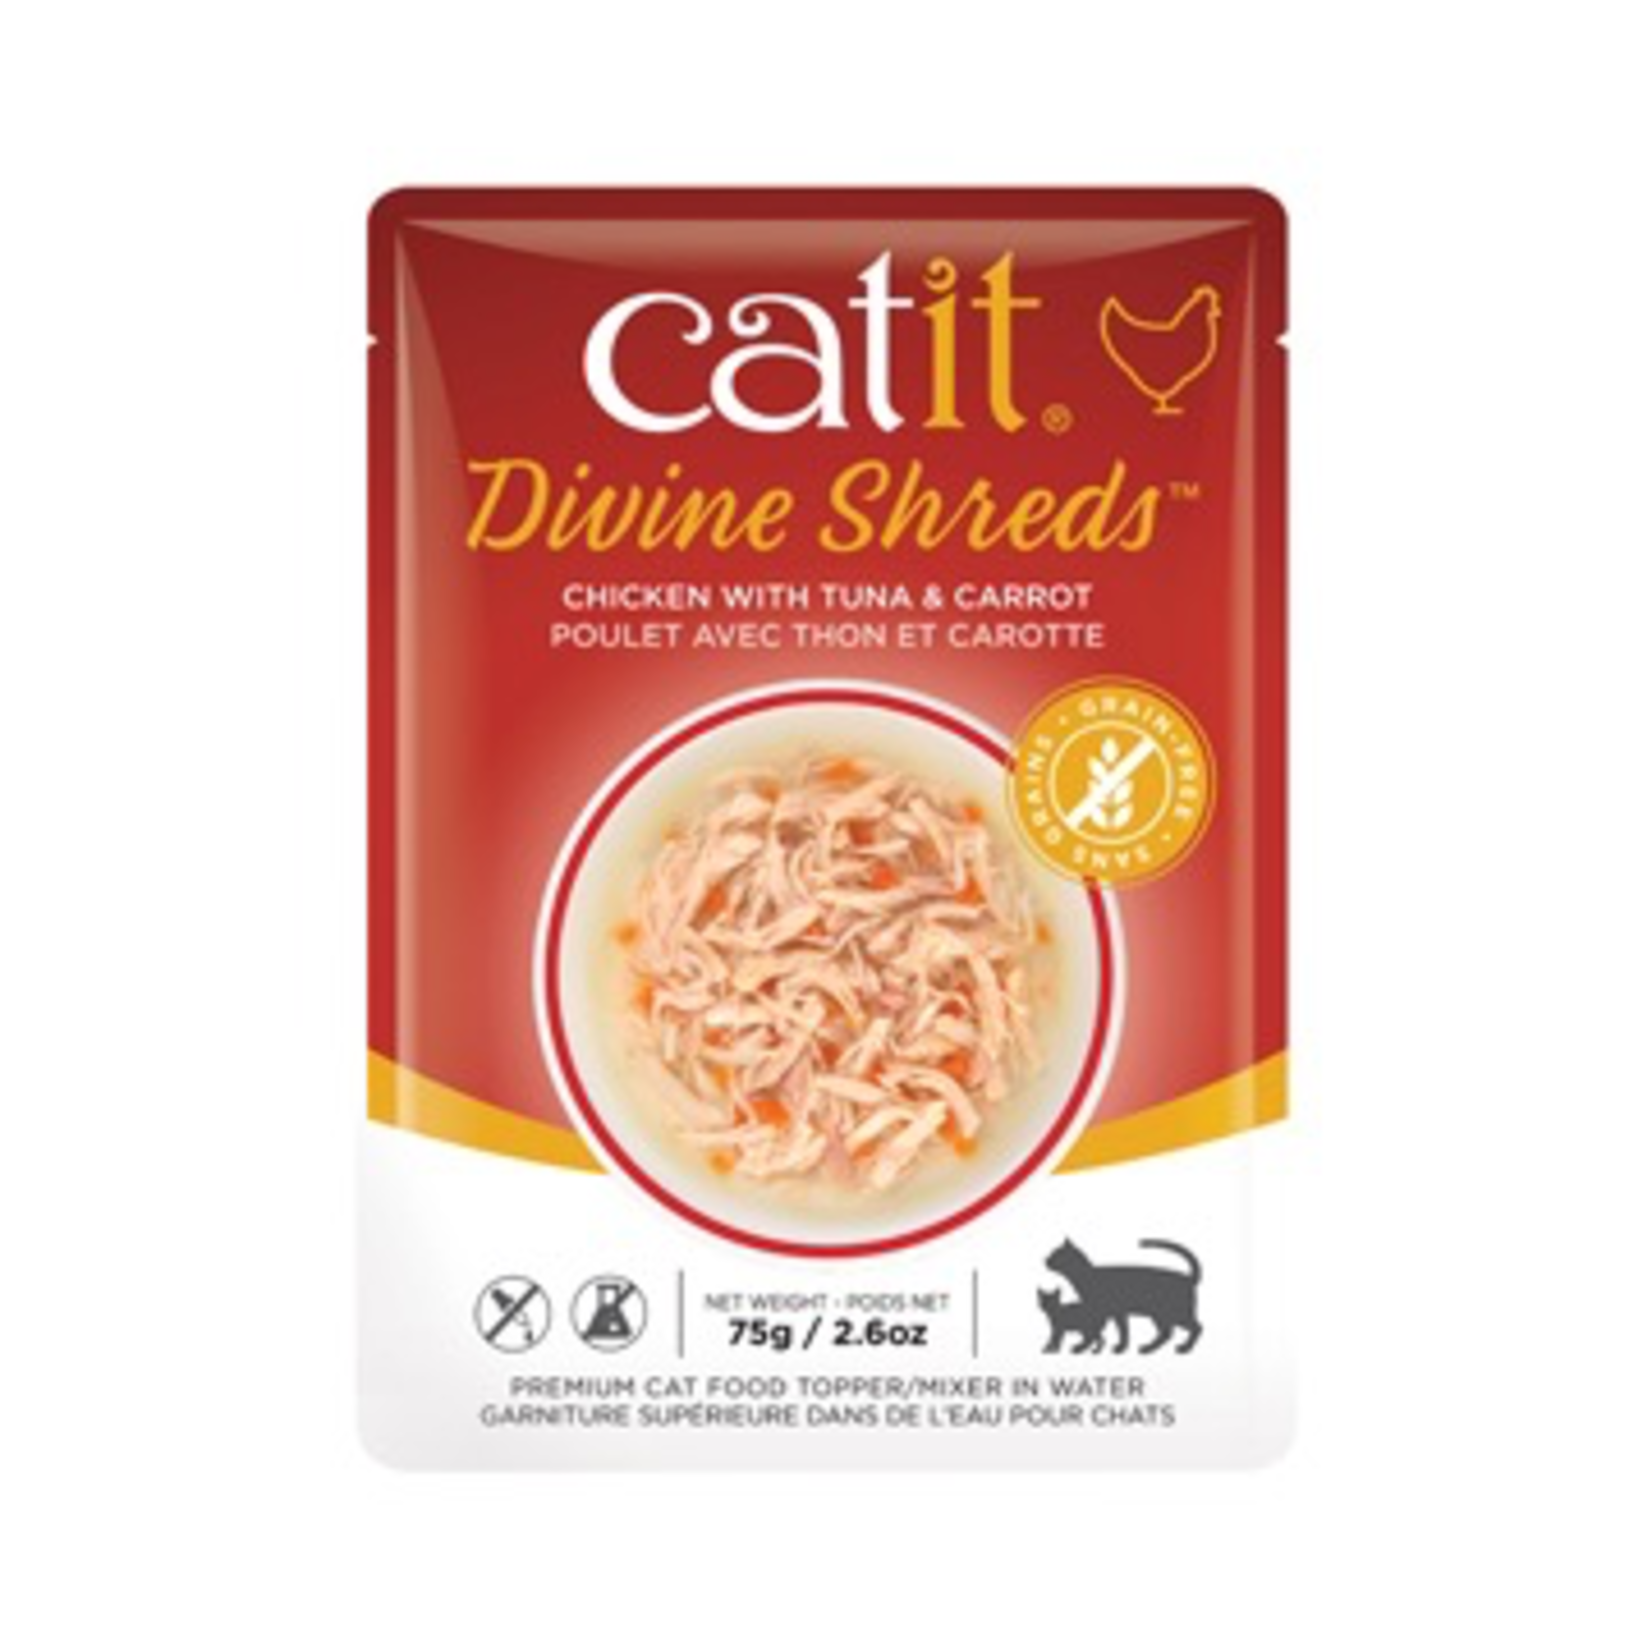 CAT IT Catit Divine Shreds - Chicken with Tuna & Carrot - 75g Pouch